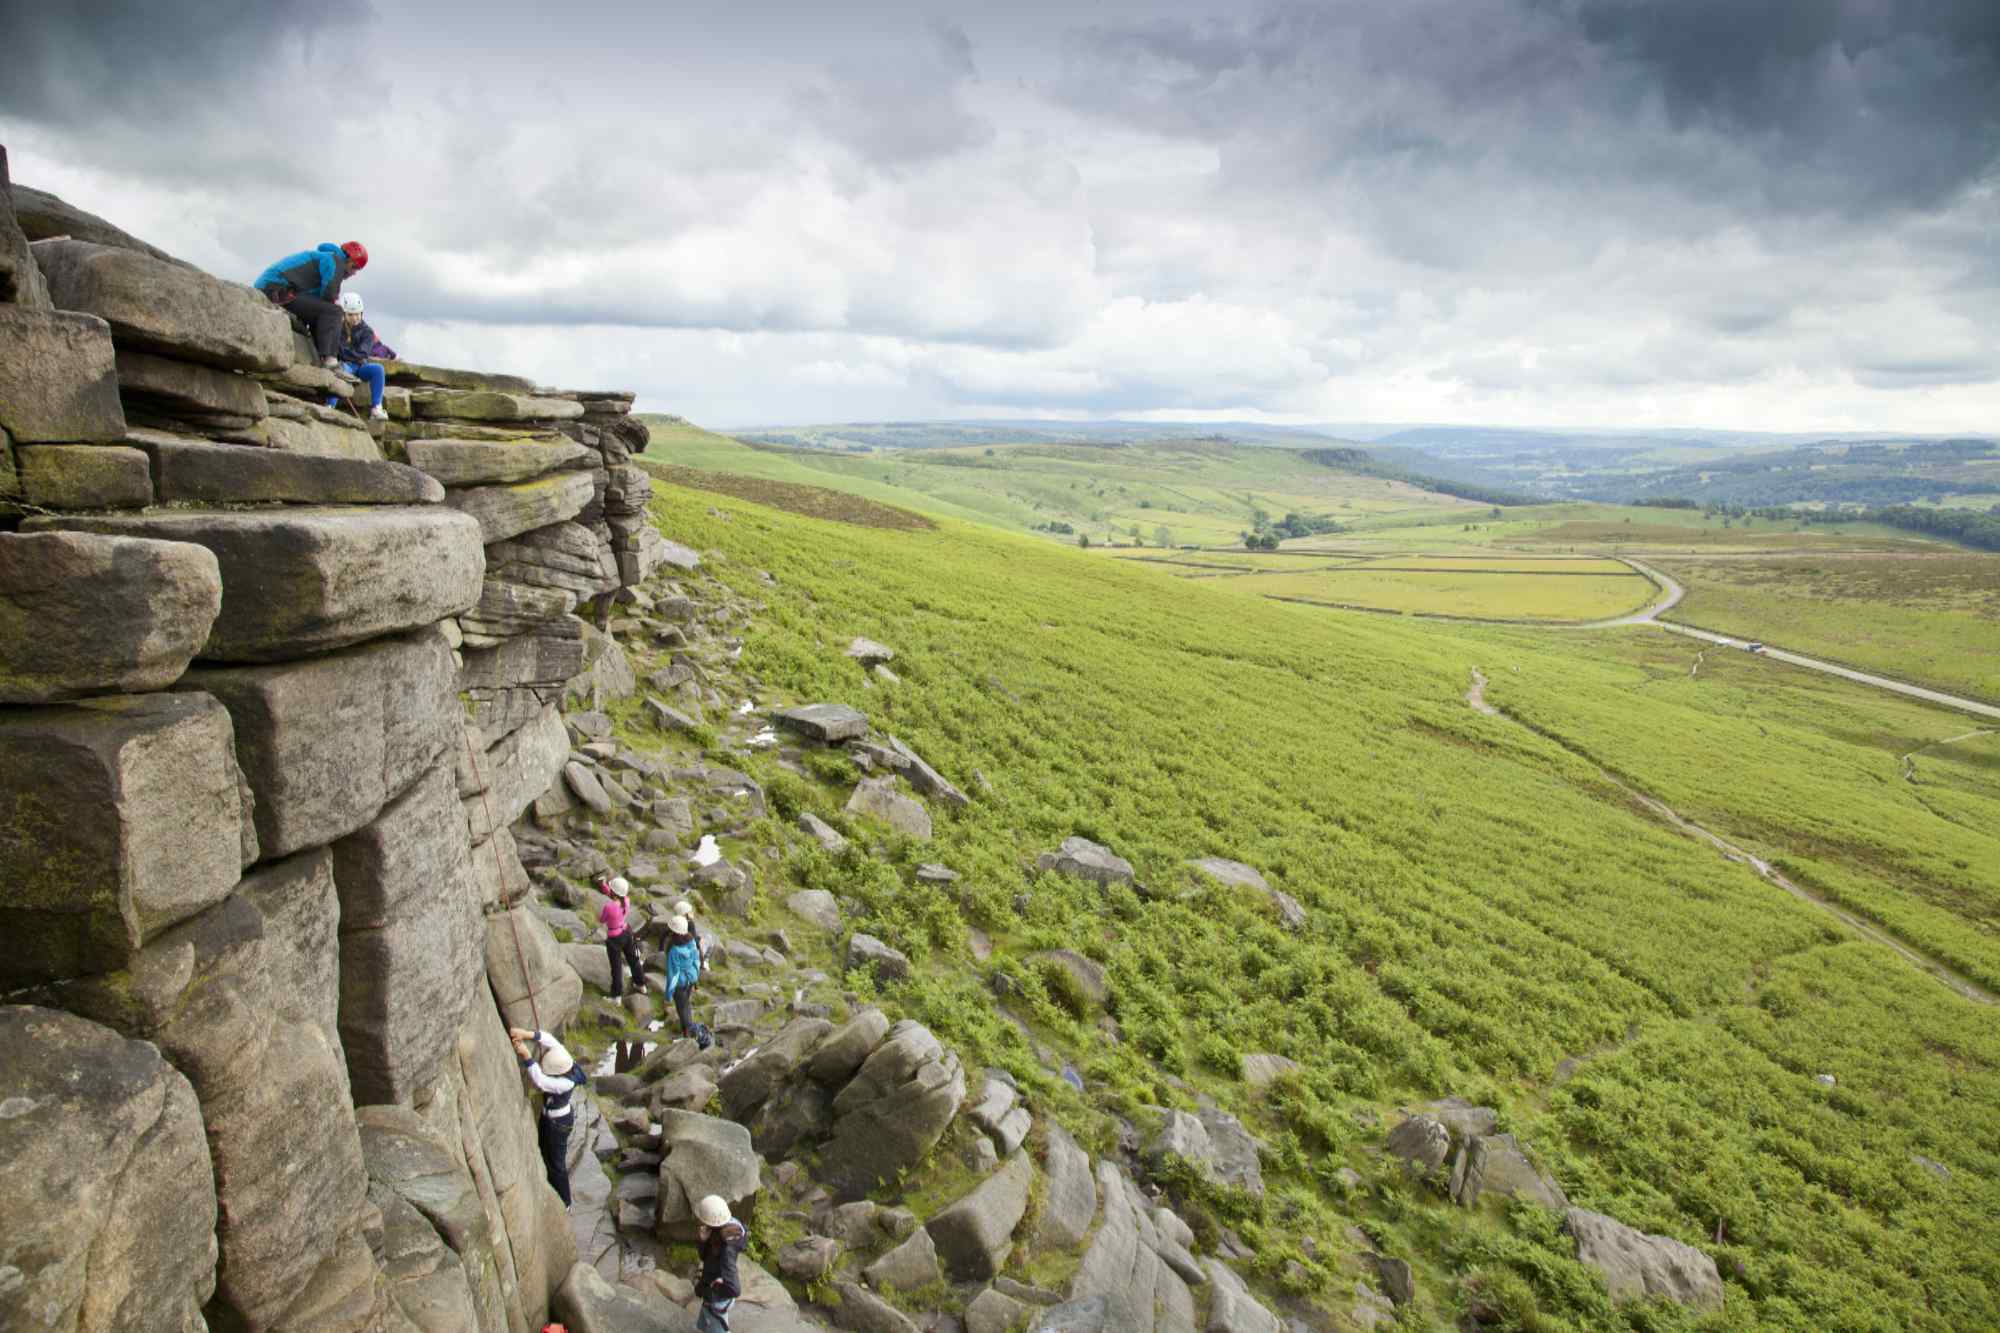 Climbers in the Peak District